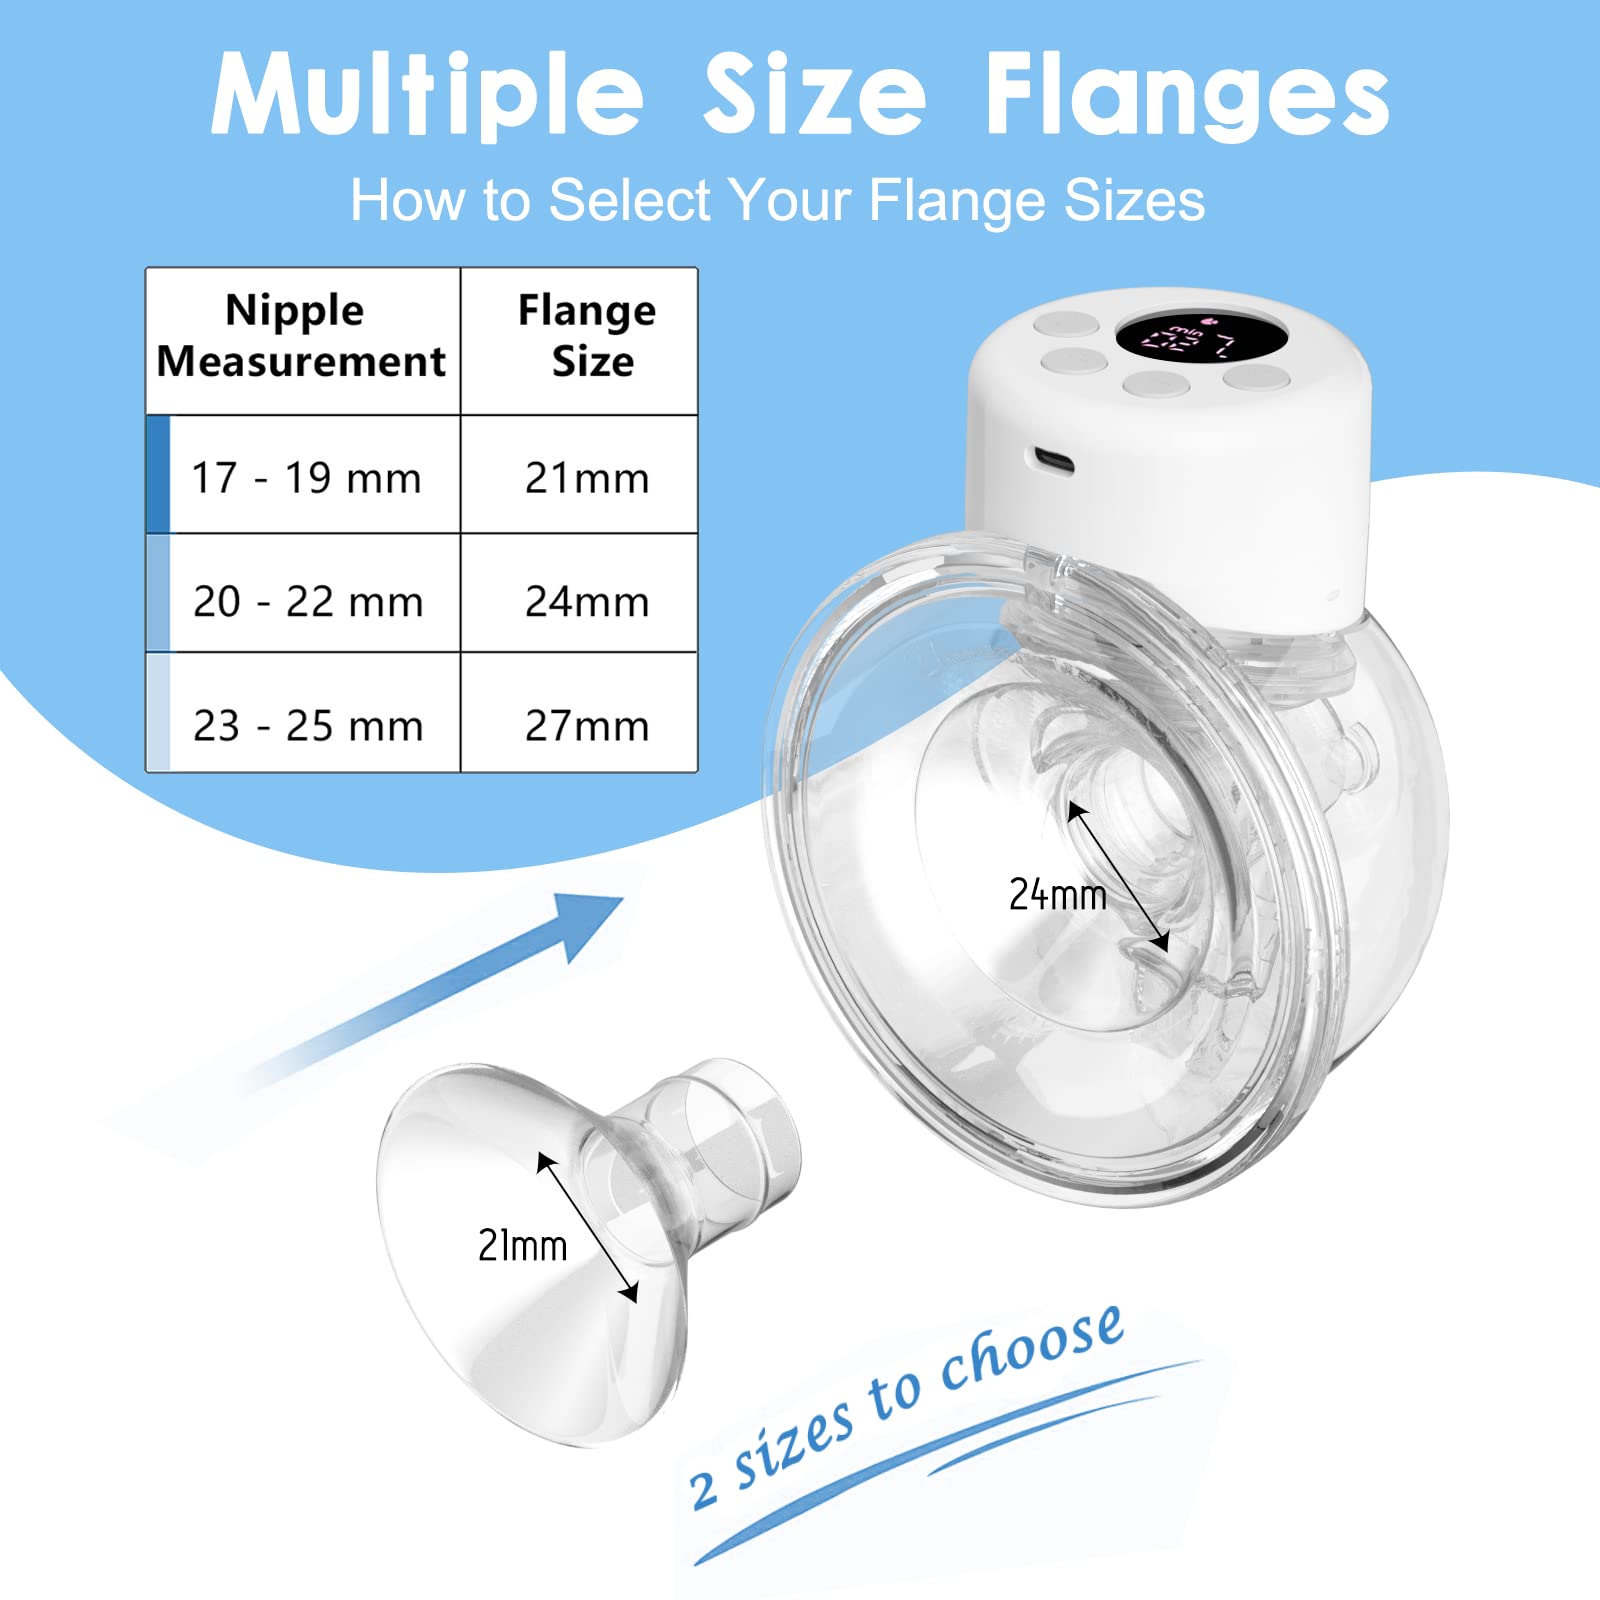 Measuring Your Breast Pump Horn Size